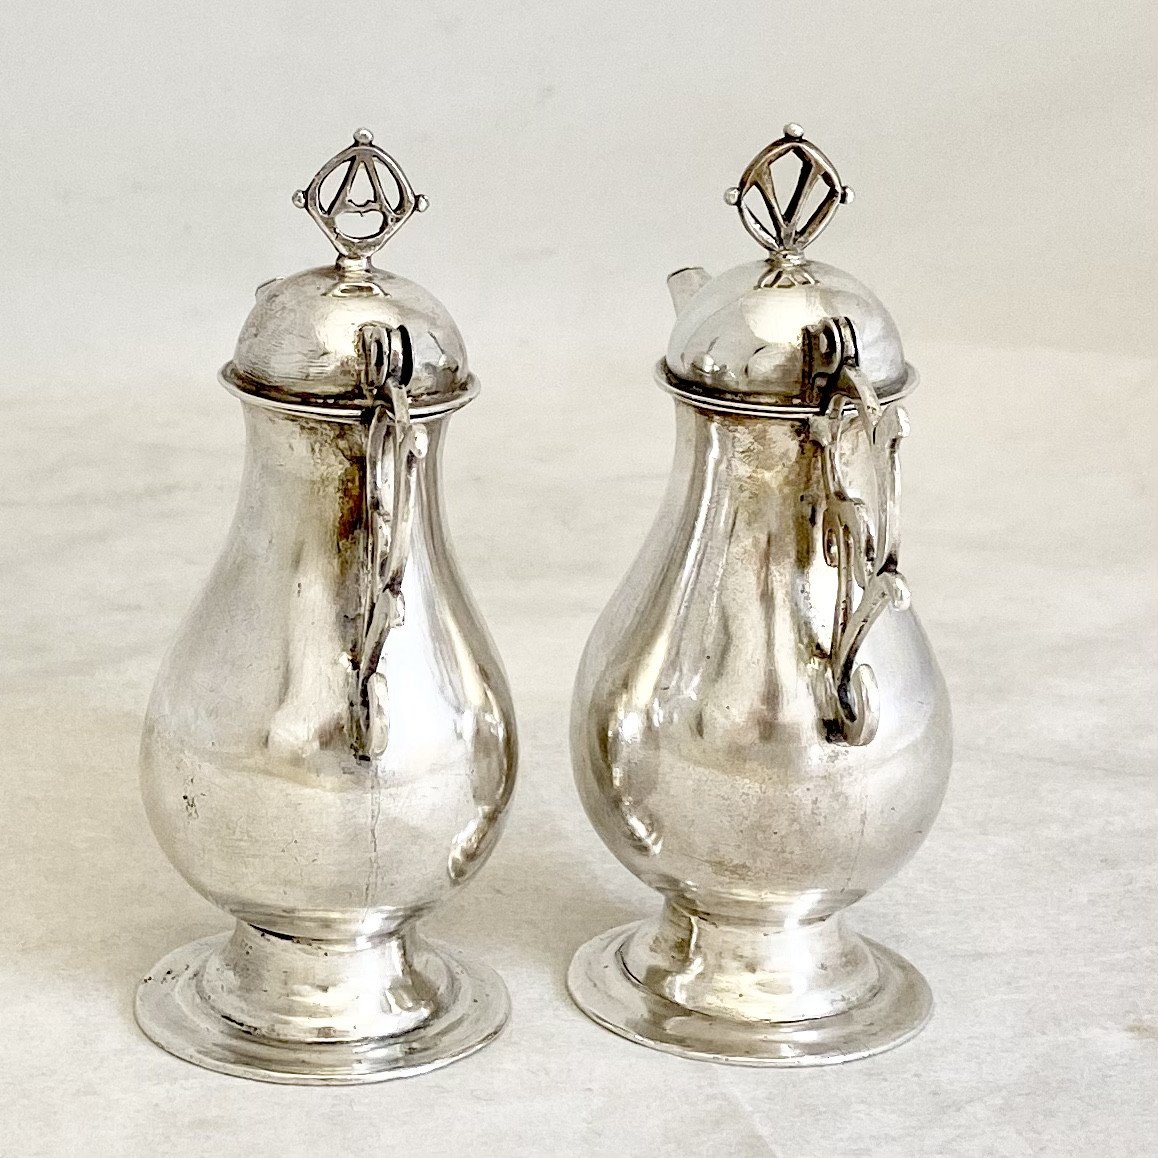 Pair Of Burettes, Spain 1680-1730, Sterling Silver, Silversmith Rosa, Pair Of Bulbs-photo-6